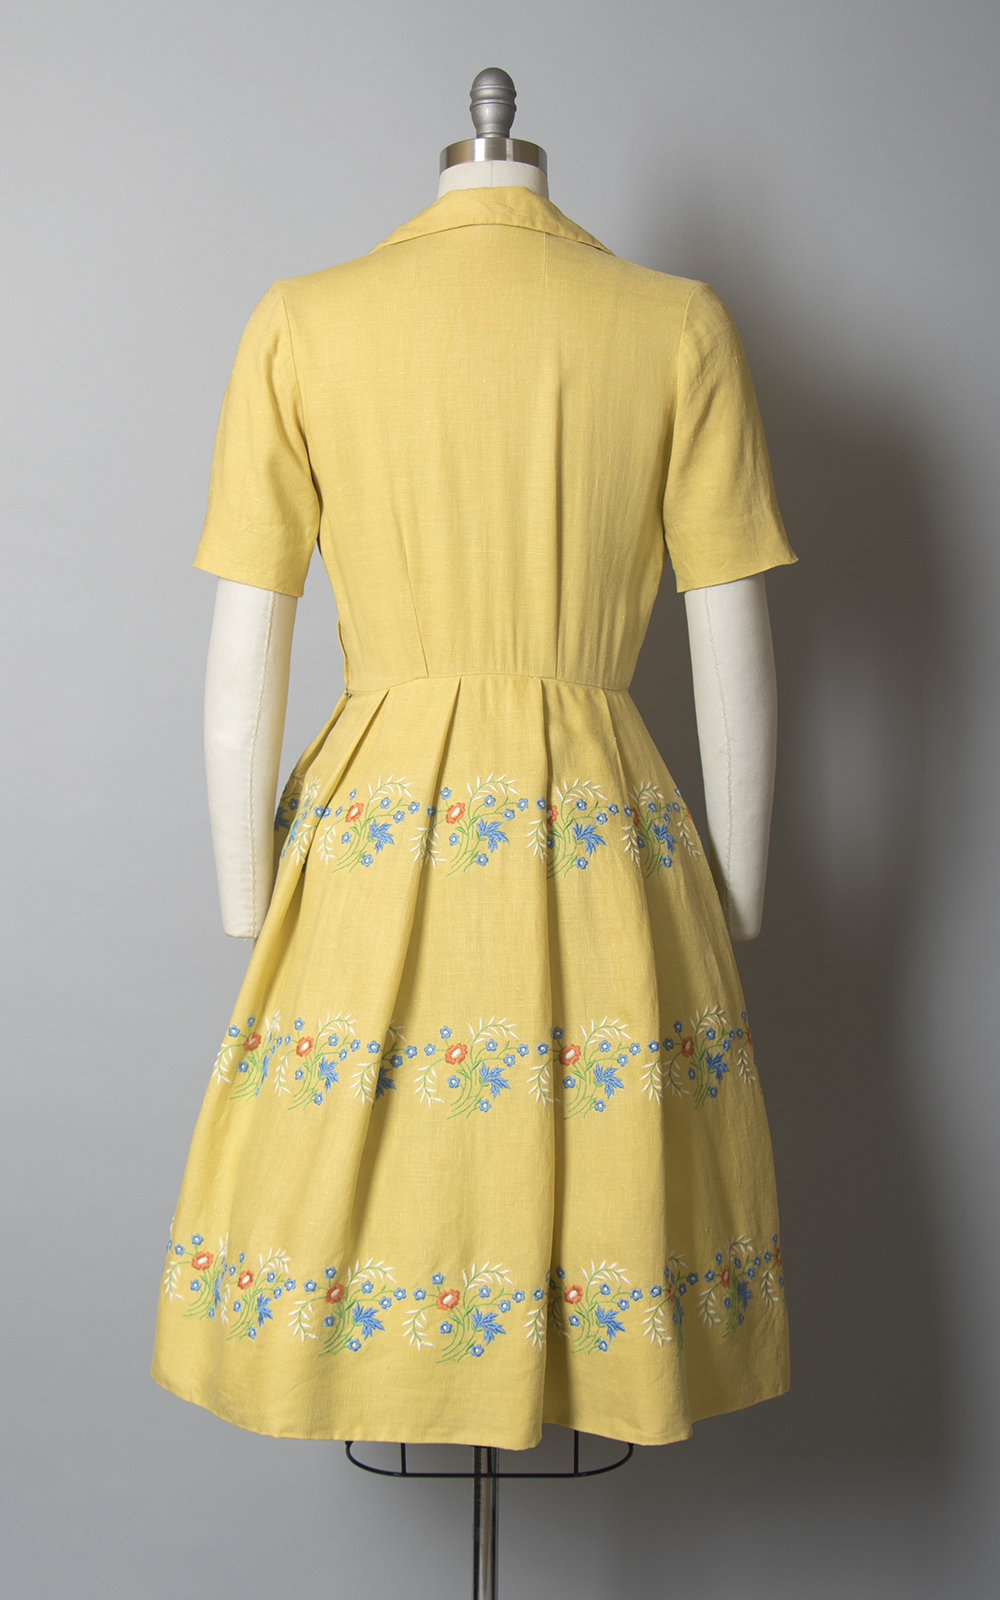 Vintage 1940s Dress | 40s Floral Embroidered Yellow Linen Shirtwaist Pleated Full Skirt Day Dress (small)